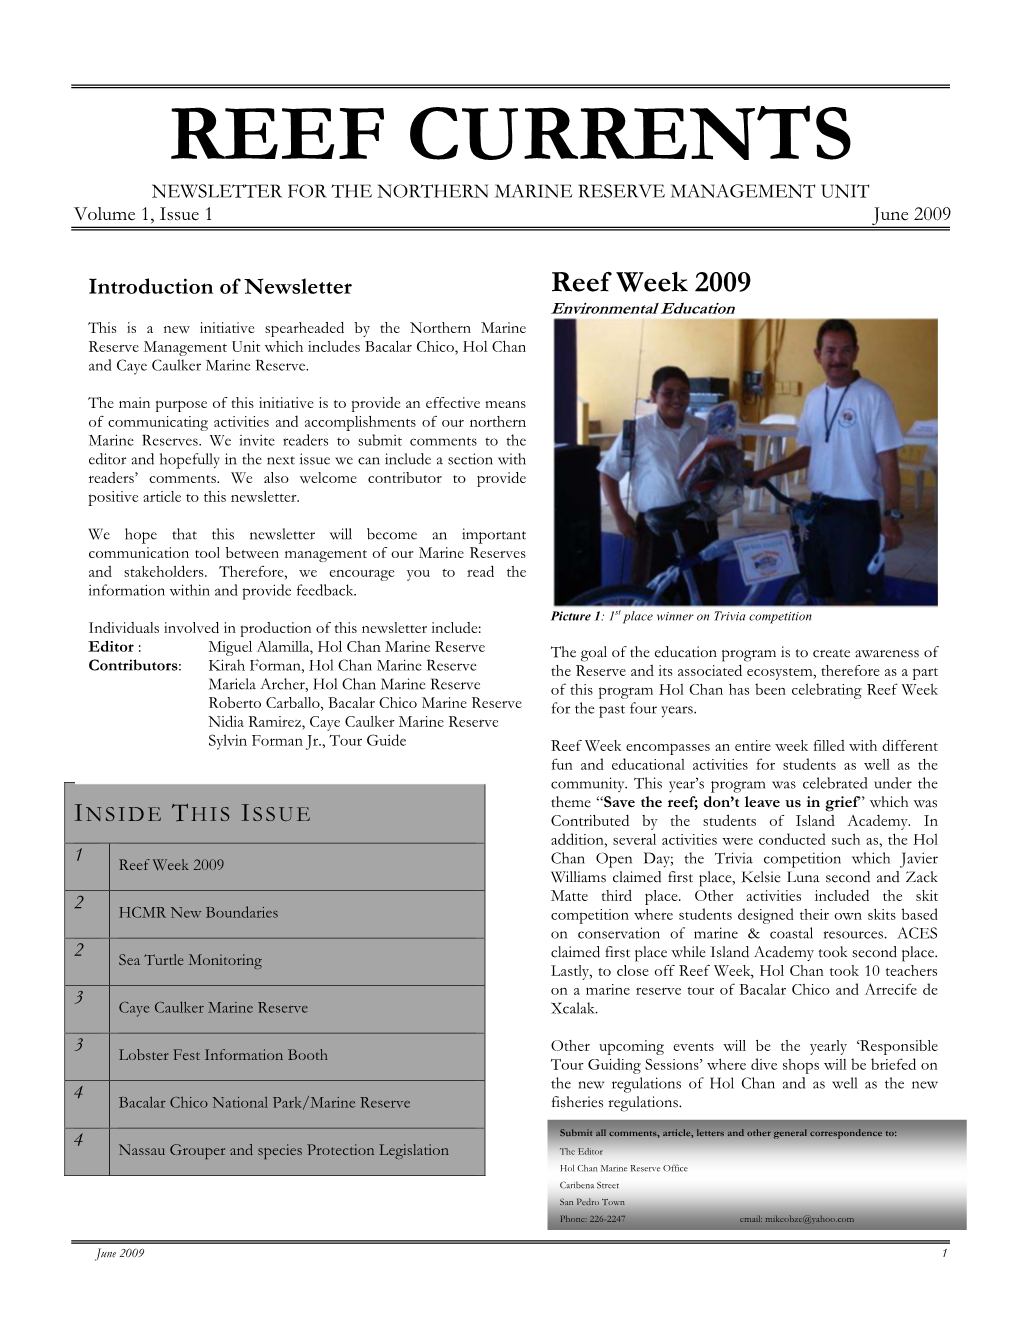 REEF CURRENTS NEWSLETTER for the NORTHERN MARINE RESERVE MANAGEMENT UNIT Volume 1, Issue 1 June 2009